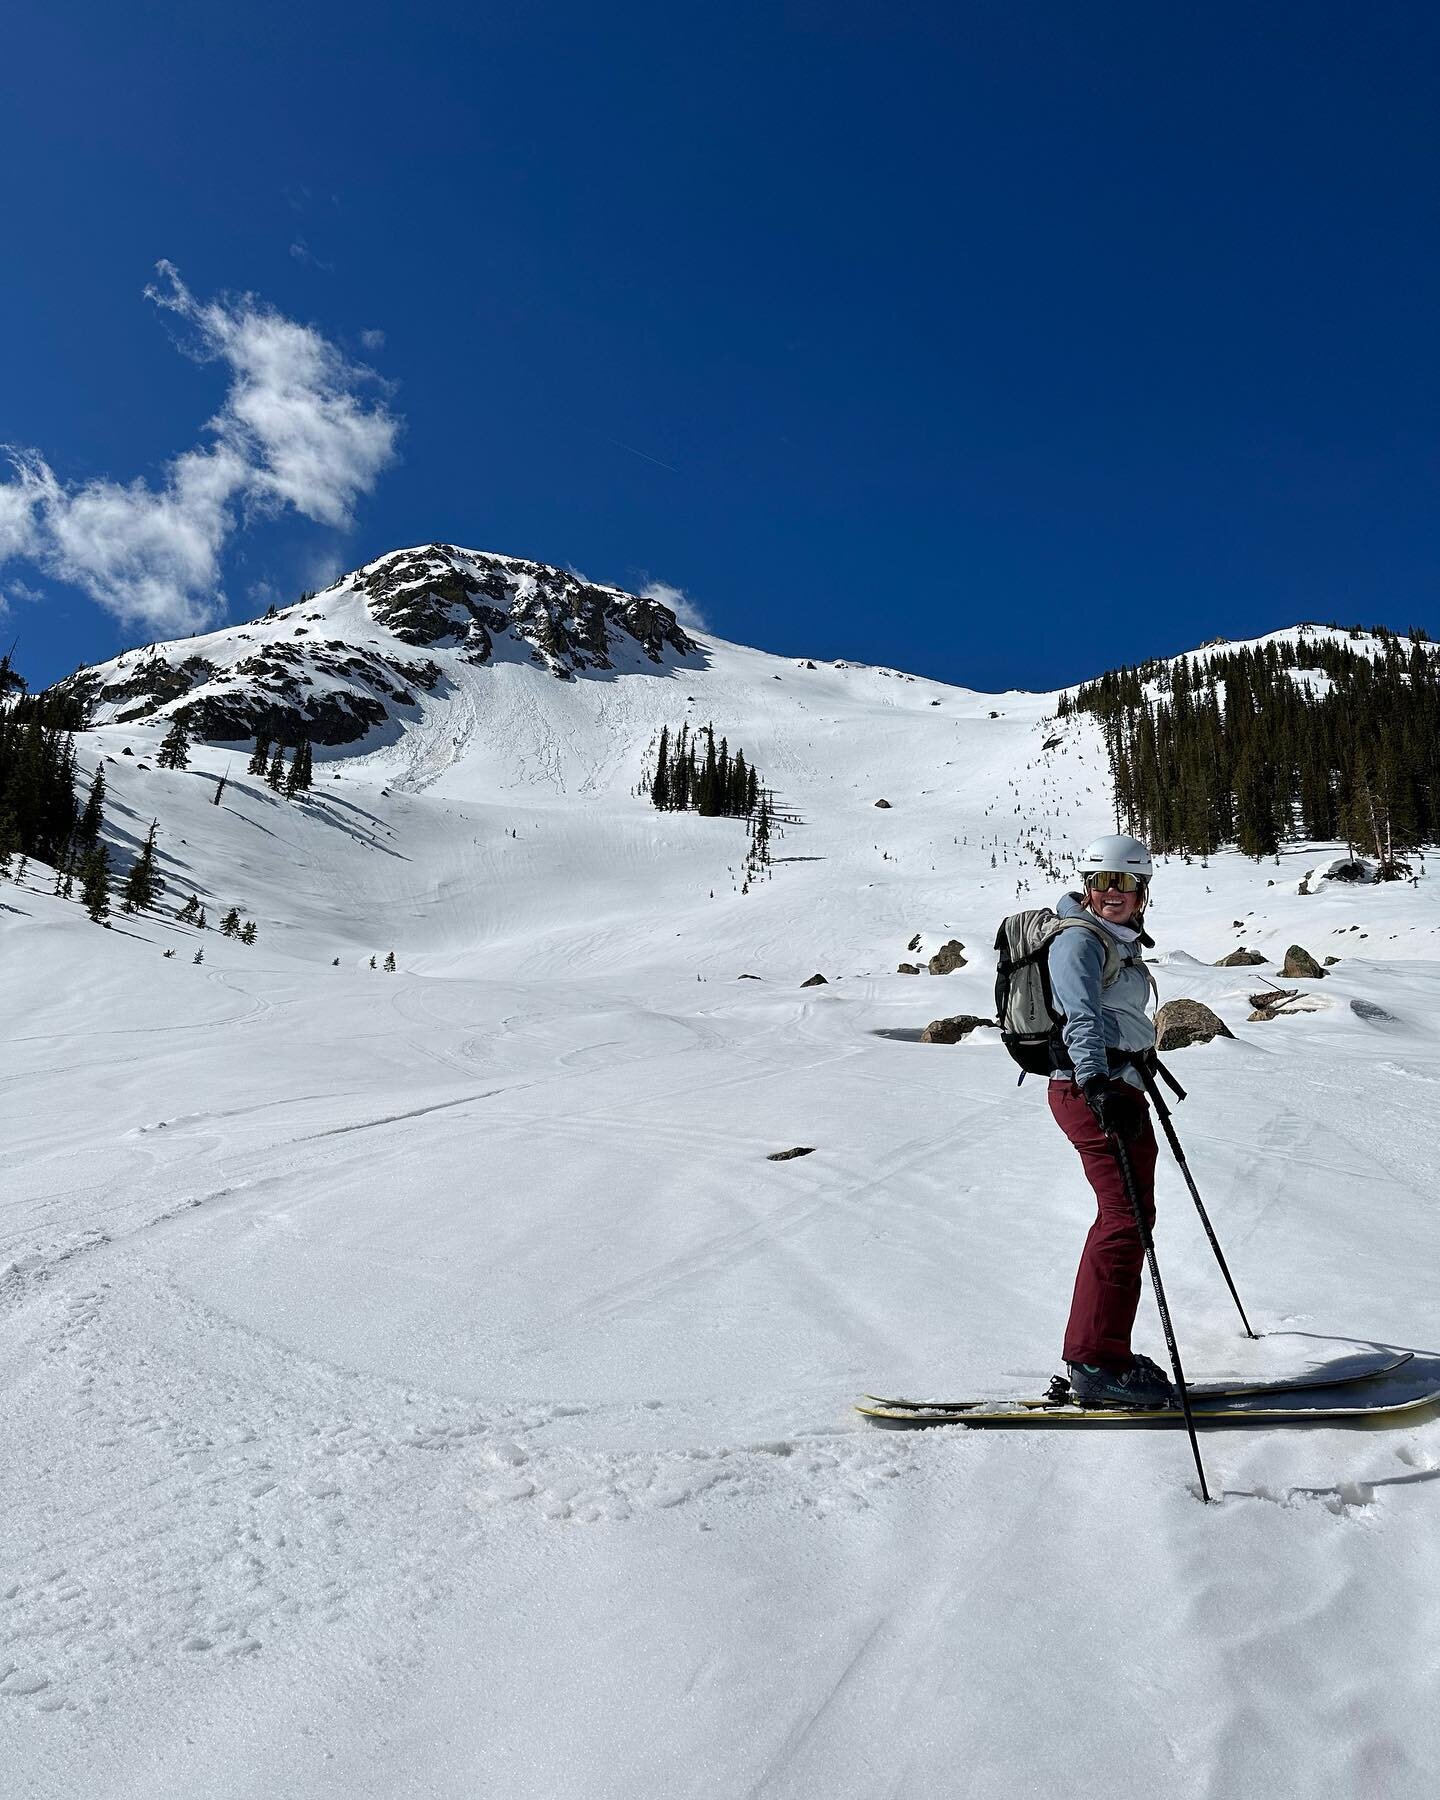 Despite warm temperatures, ski season is still firing in the mountains! ⛷️🌞 

Our dear Helen embarked on a mellow tour up the pass for a morning ski with friends before everyone parted ways for the summer. At the summit, they soaked in the stunning 